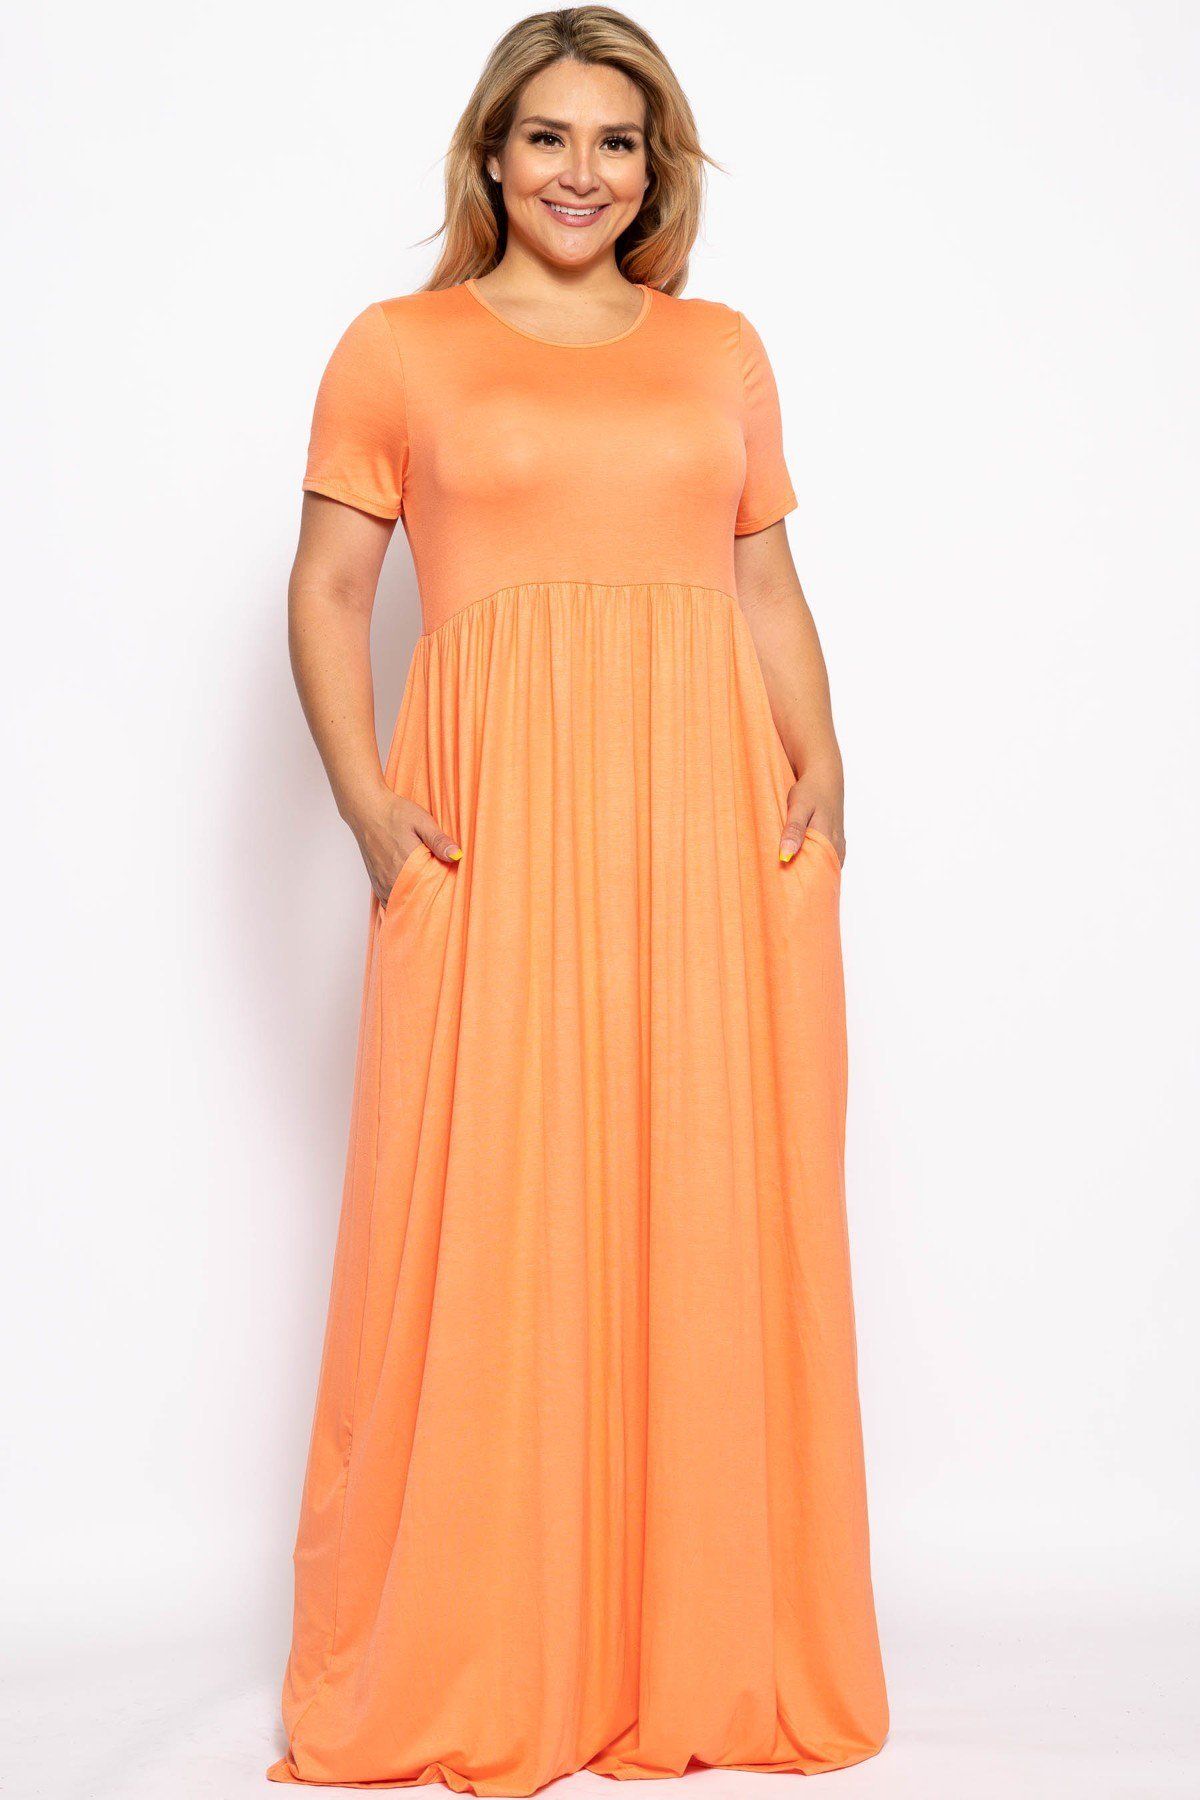 Plus Size Lovely Ladies Polyester Blend Made In U.S.A. Vibrant Short Sleeved Round Neck Maxi Dress (Coral)